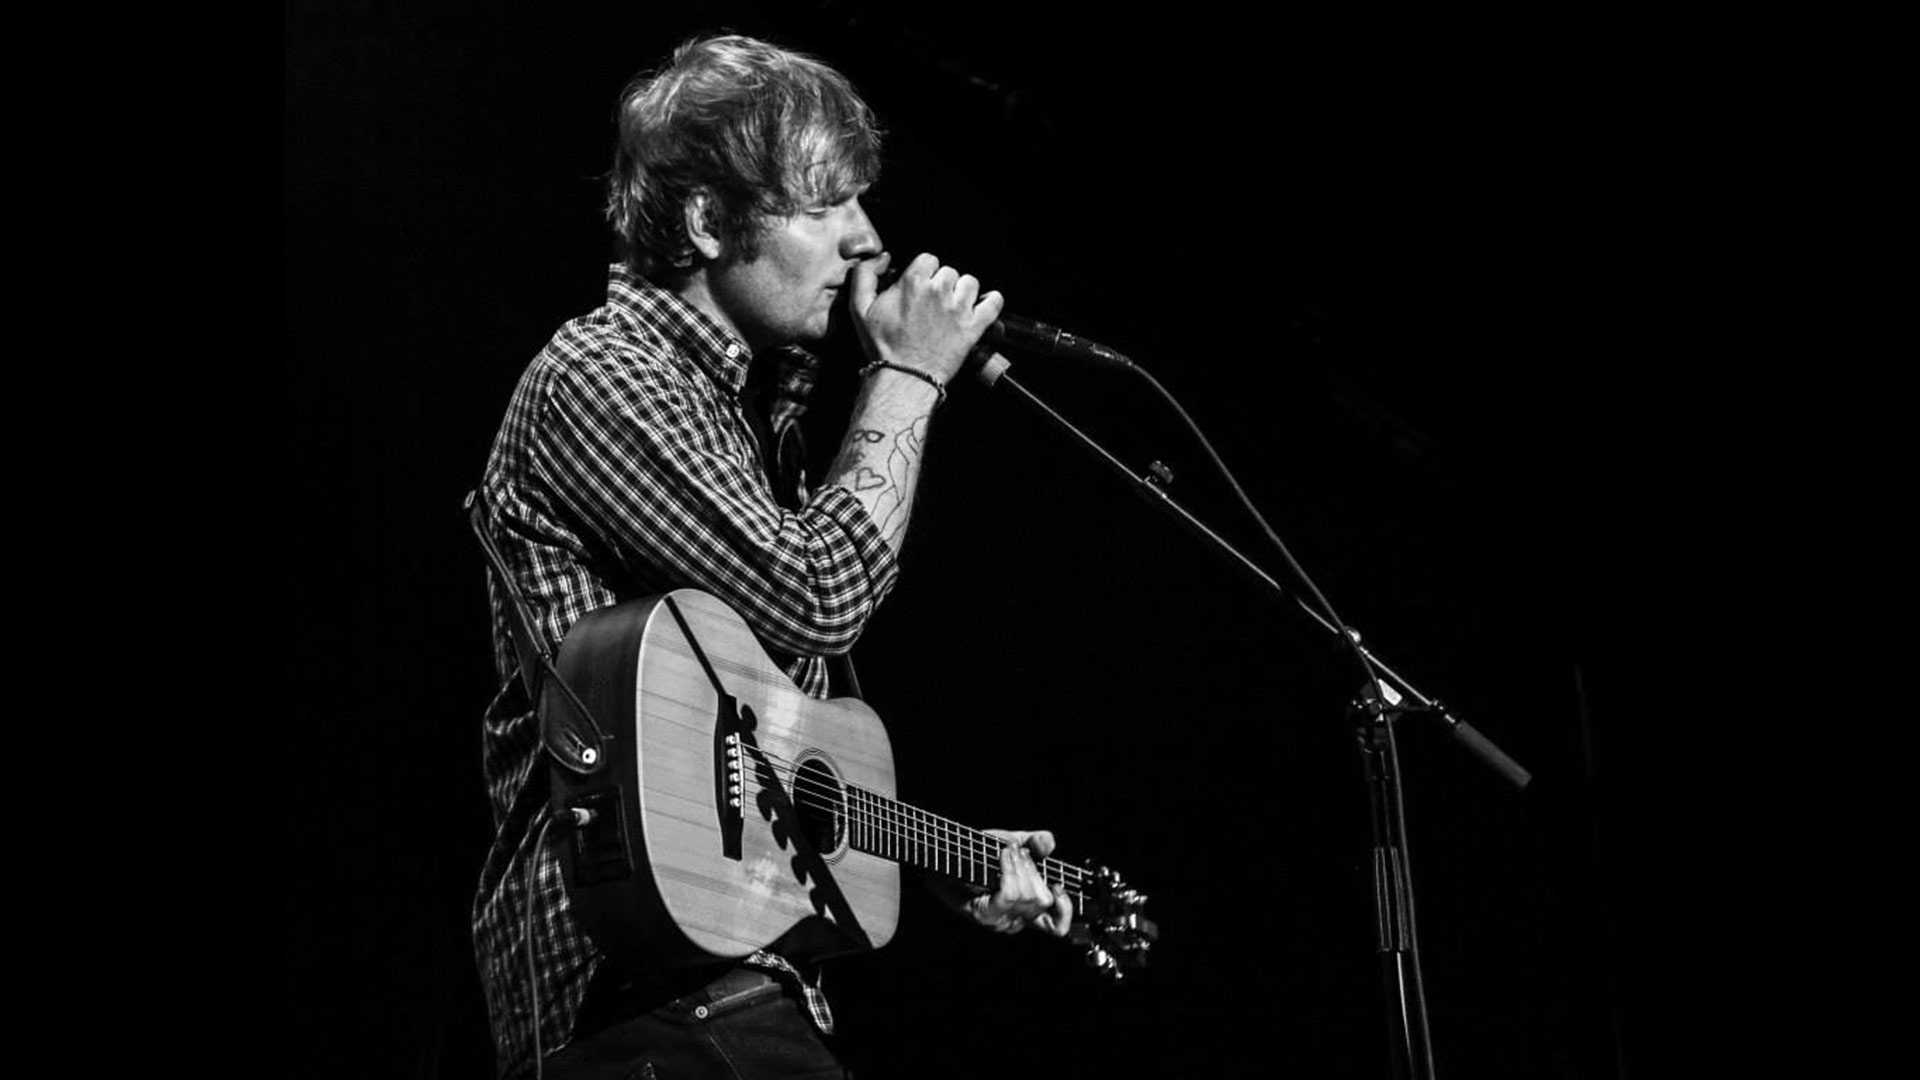 Now, Ed Sheeran is going to perform in Mumbai too. GQ India